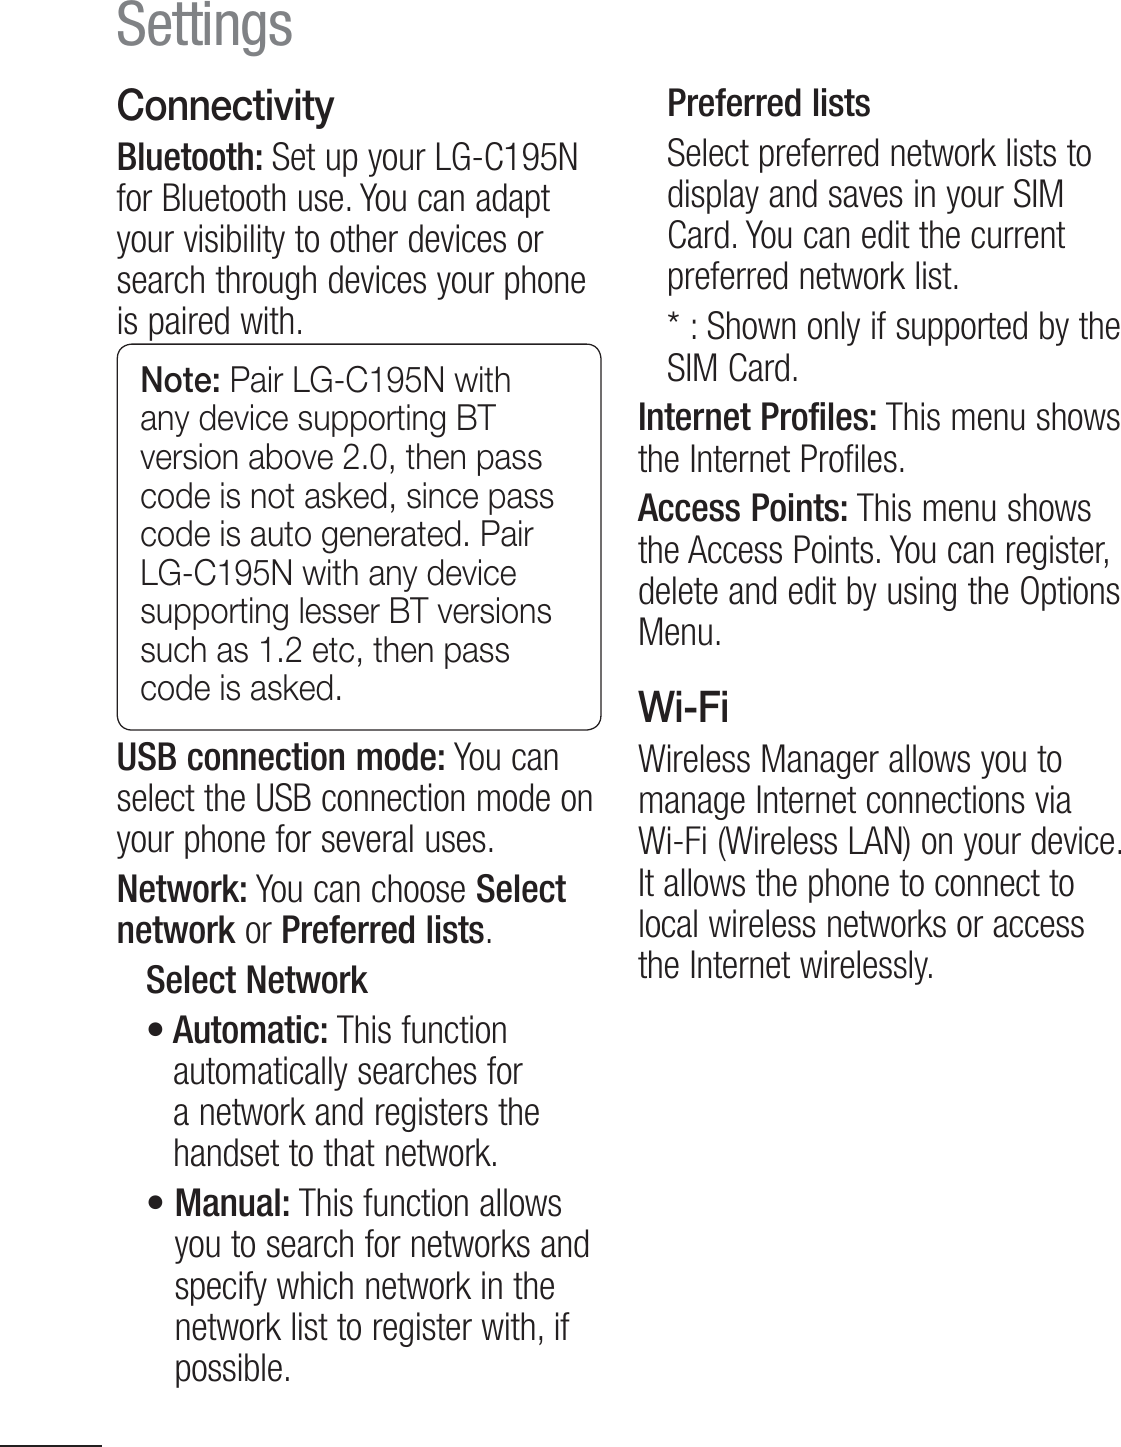 38ConnectivityBluetooth: Set up your LG-C195N for Bluetooth use. You can adapt your visibility to other devices or search through devices your phone is paired with.Note: Pair LG-C195N with any device supporting BT version above 2.0, then pass code is not asked, since pass code is auto generated. Pair LG-C195N with any device supporting lesser BT versions such as 1.2 etc, then pass code is asked.USB connection mode: You can select the USB connection mode on your phone for several uses.Network: You can choose Select network or Preferred lists.Select Networkt&quot;VUPNBUJDThis function automatically searches for a network and registers the handset to that network.t.BOVBMThis function allows you to search for networks and specify which network in the network list to register with, if possible.Preferred lists Select preferred network lists to display and saves in your SIM Card. You can edit the current preferred network list.4IPXOPOMZJGTVQQPSUFECZUIFSIM Card. Internet Profiles: This menu shows the Internet Profiles. Access  Points: This menu shows the Access Points. You can register, delete and edit by using the Options Menu.Wi-FiWireless Manager allows you to manage Internet connections via Wi-Fi (Wireless LAN) on your device. It allows the phone to connect to local wireless networks or access the Internet wirelessly.Settings